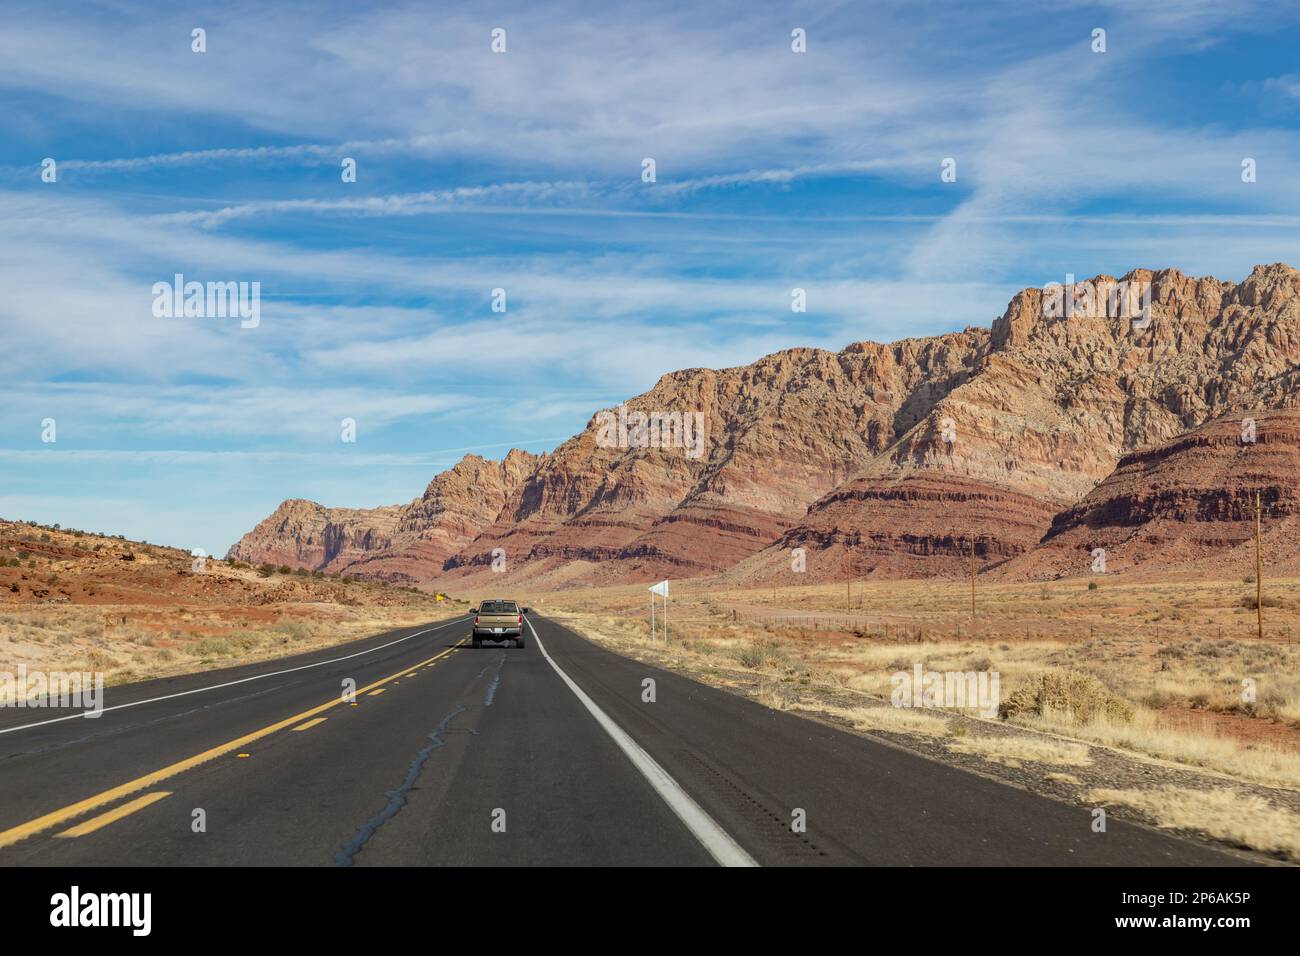 A picture of the U.S. Route 89 in Arizona and its rock formation landscape. Stock Photo